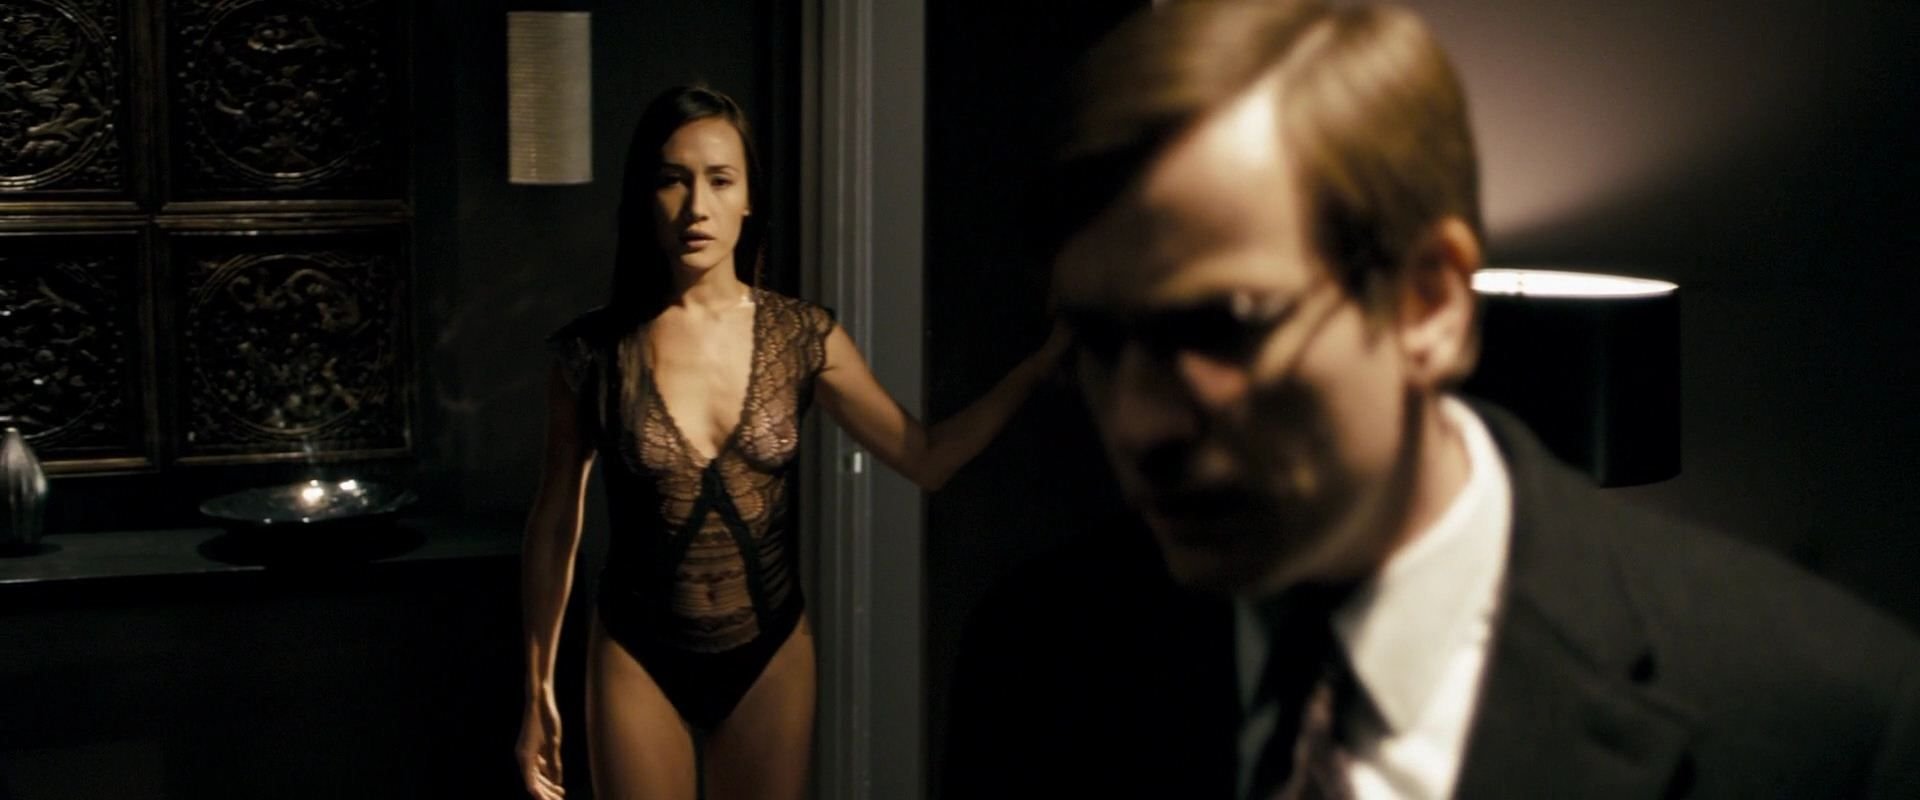 Maggie q fappening - Maggie q naked pic.